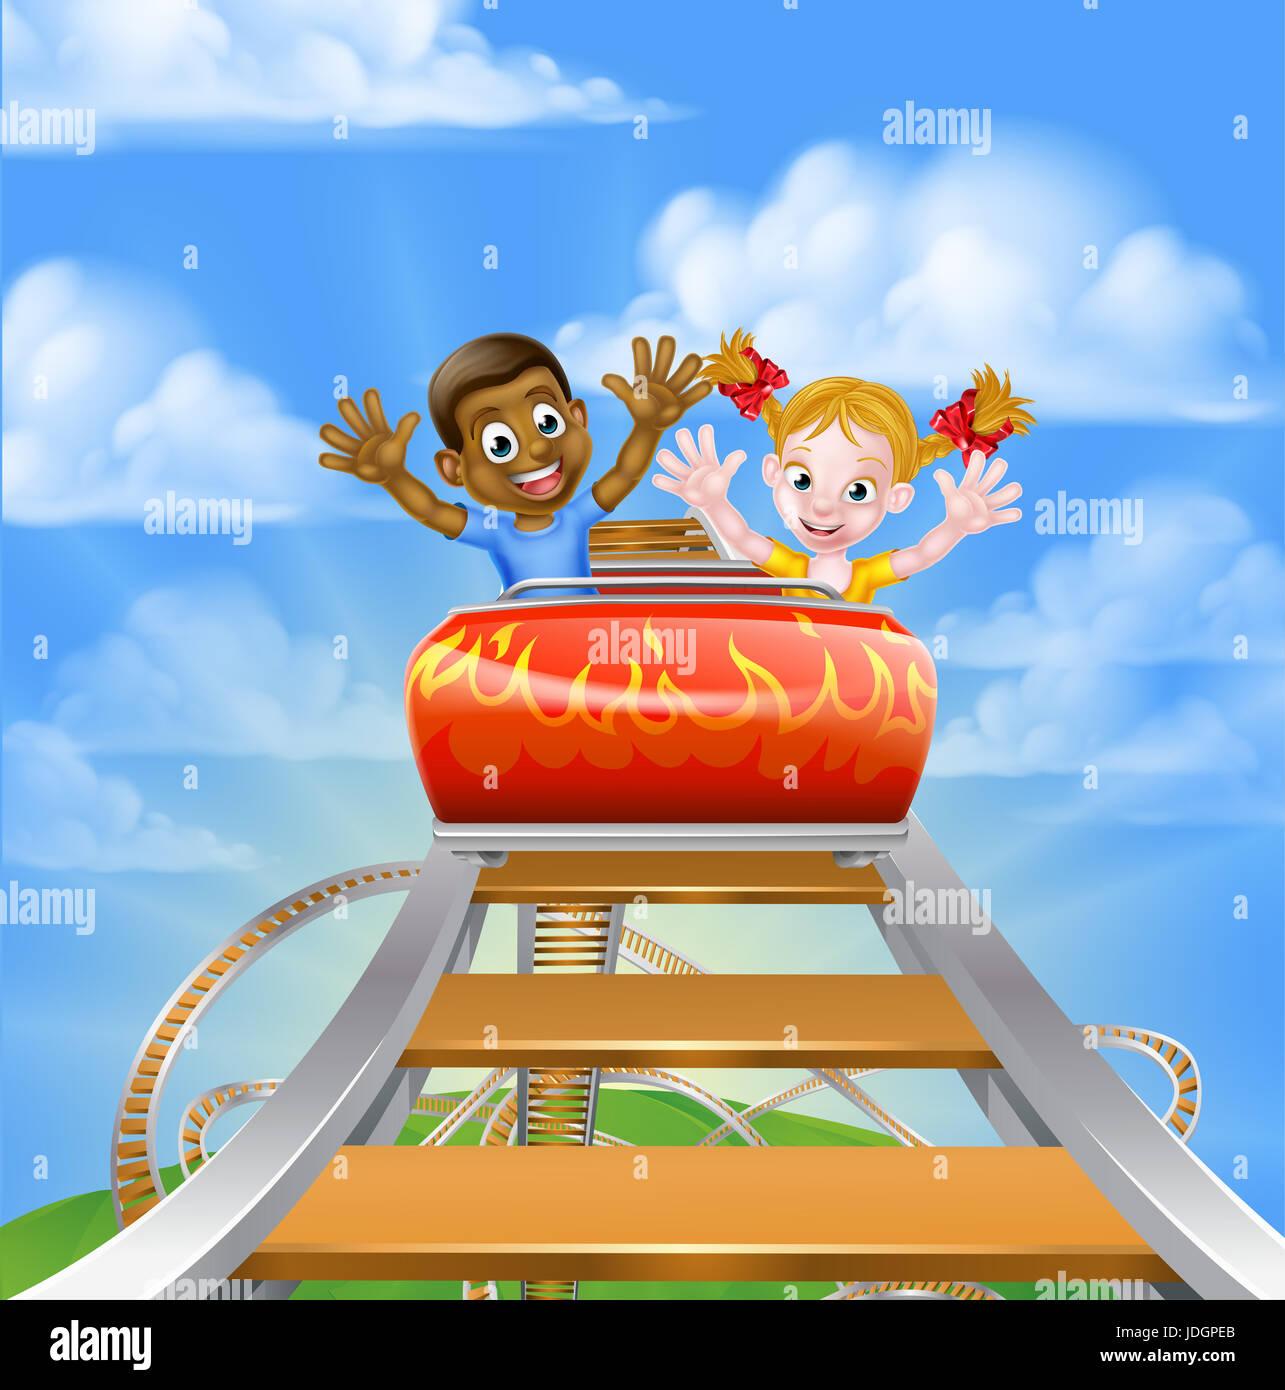 Cartoon boy and girl kids riding on a roller coaster ride at a theme park or amusement park Stock Photo